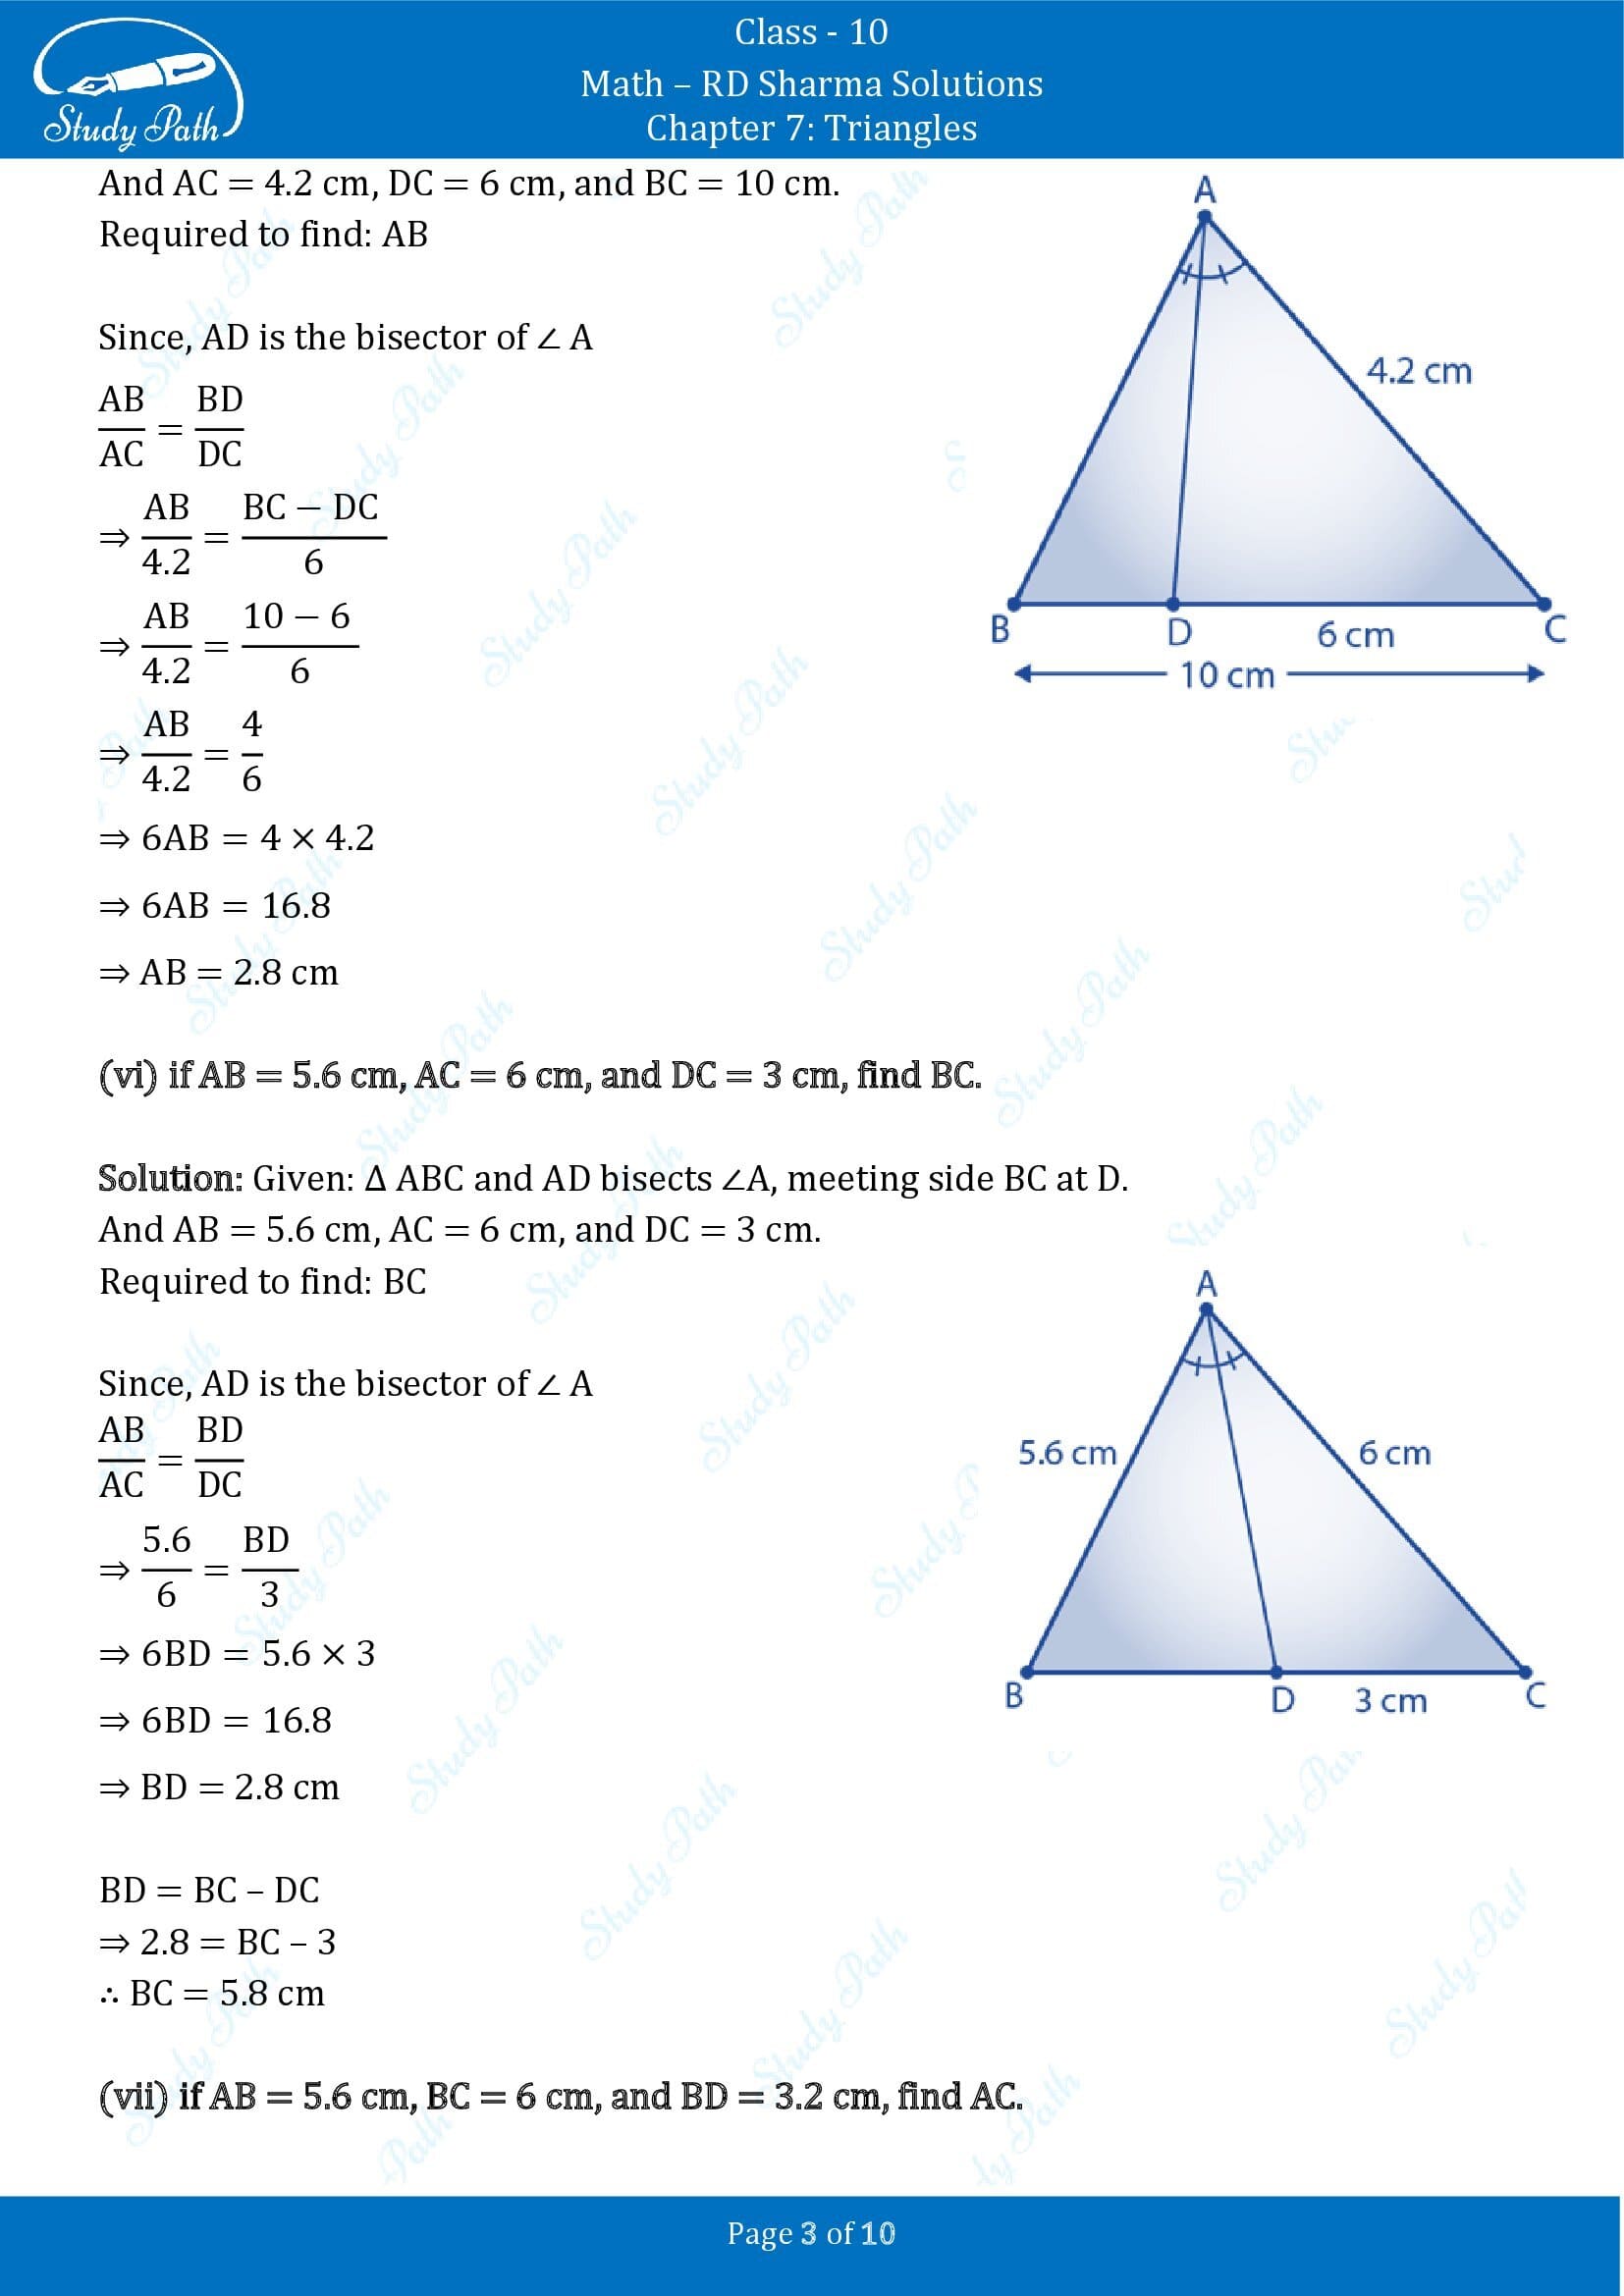 RD Sharma Solutions Class 10 Chapter 7 Triangles Exercise 7.3 00003